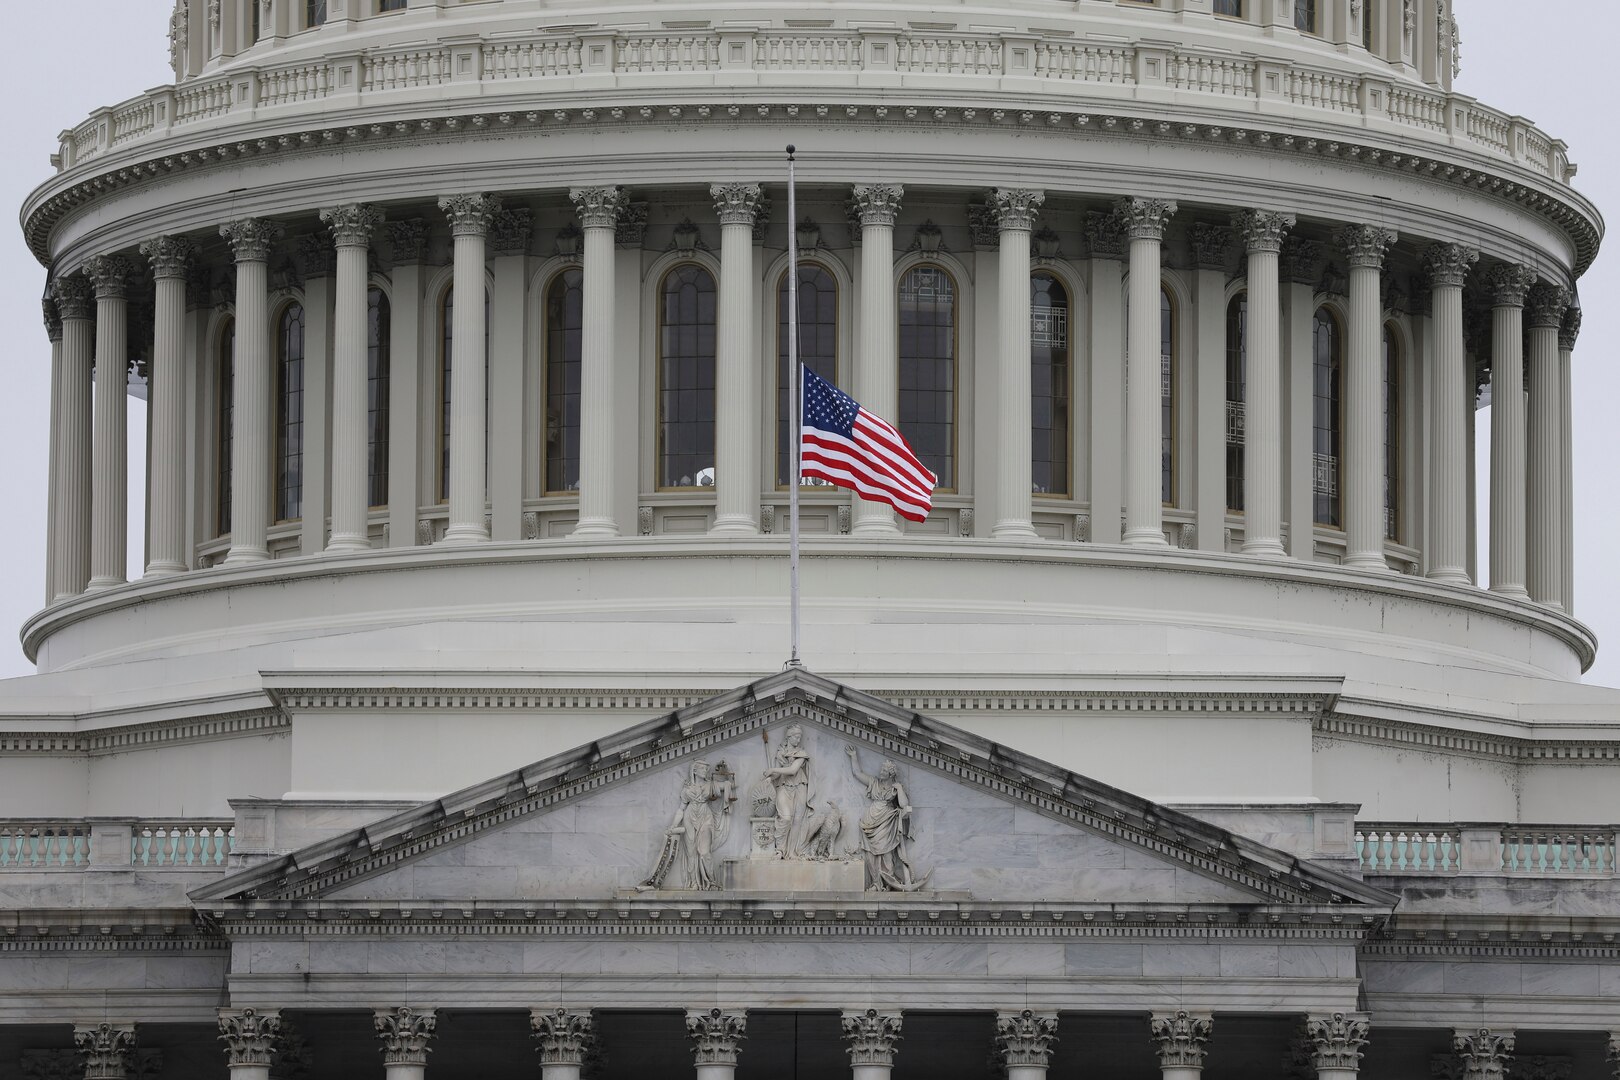 Approximately 100 Vermont National Guardsmen will deploy to Washington, D.C., to support inauguration efforts the week of Jan. 18, 2021. In this photo, the American flag flies at half-staff over the U.S. Capitol Jan. 11 in honor of Capitol Police Officer Brian Sicknick, who was killed during the riot Jan. 6.